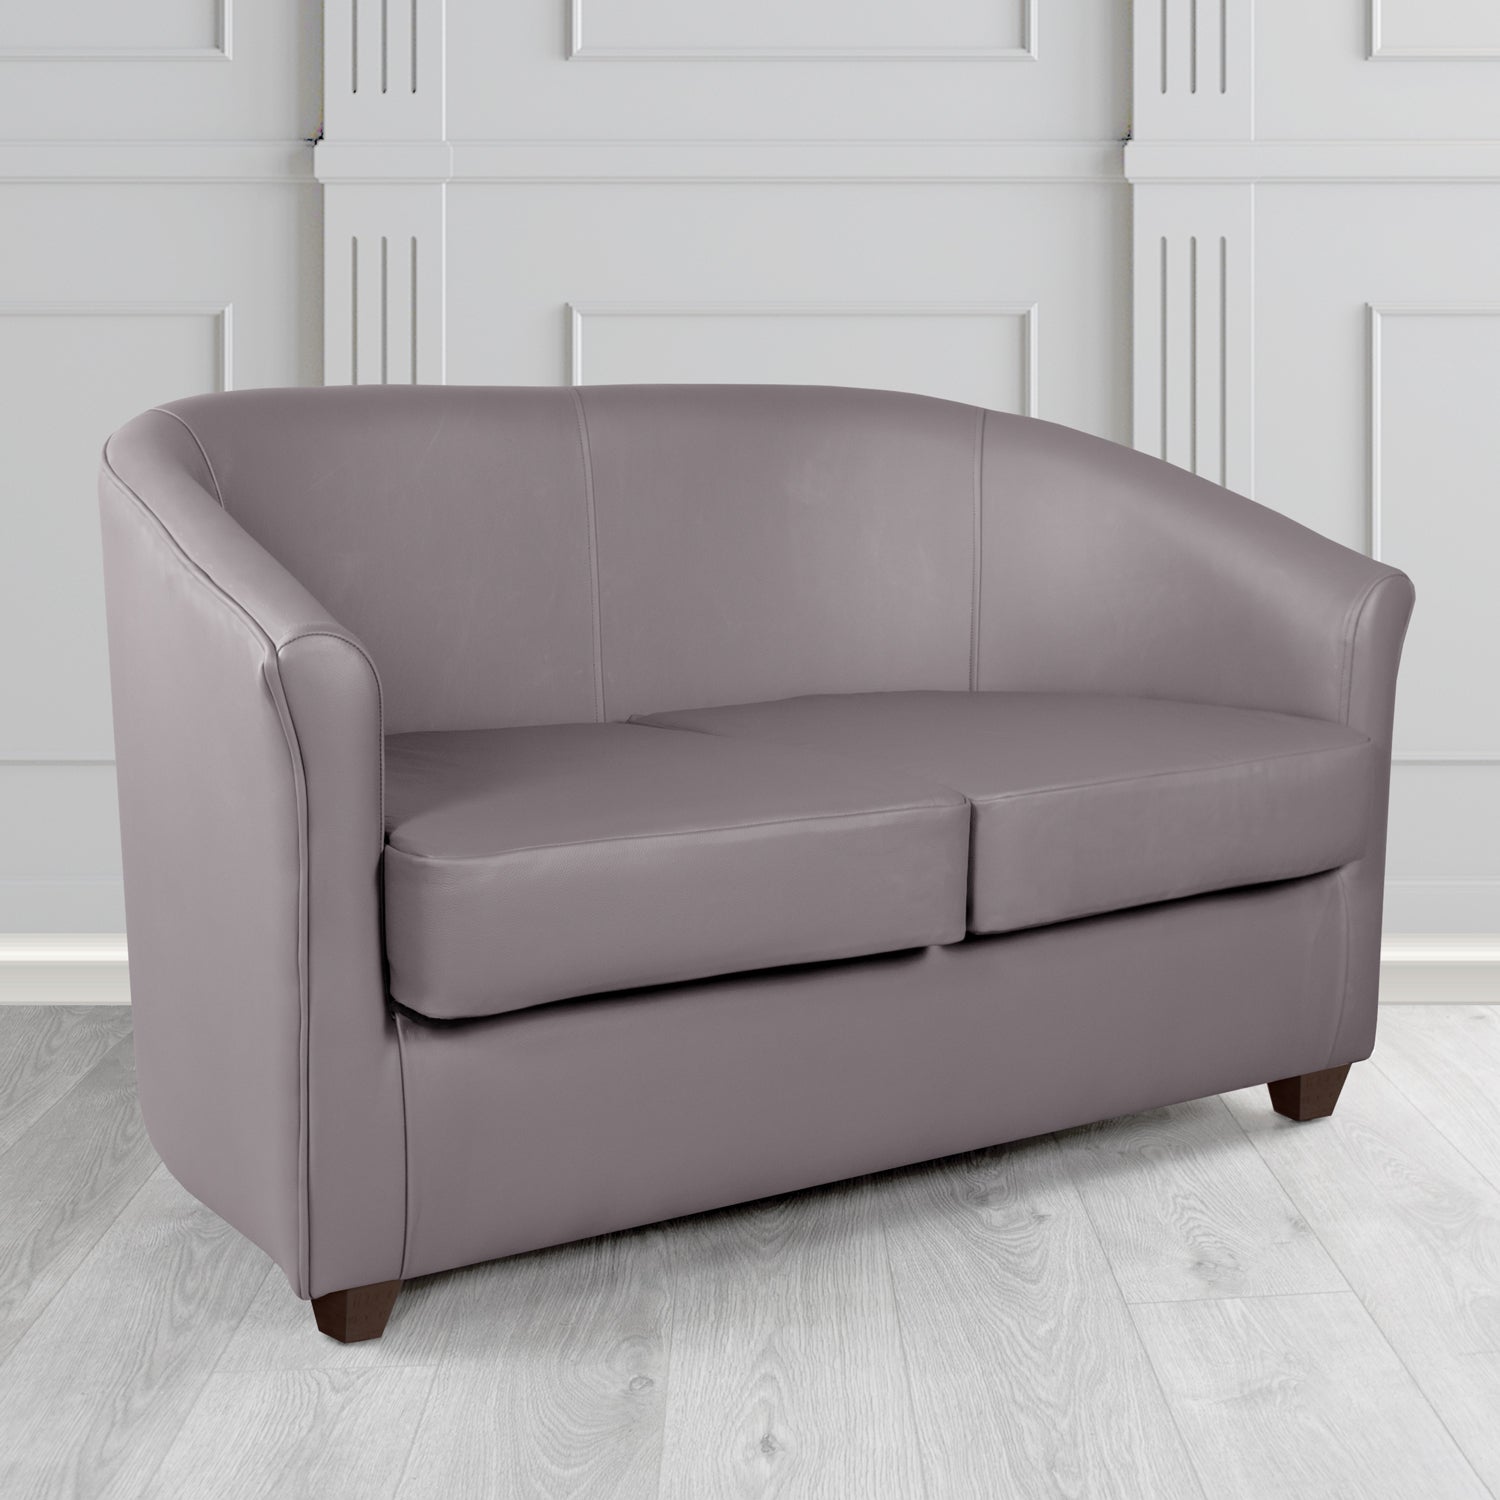 Cannes 2 Seater Tub Sofa in Just Colour Elephant Crib 5 Faux Leather - The Tub Chair Shop